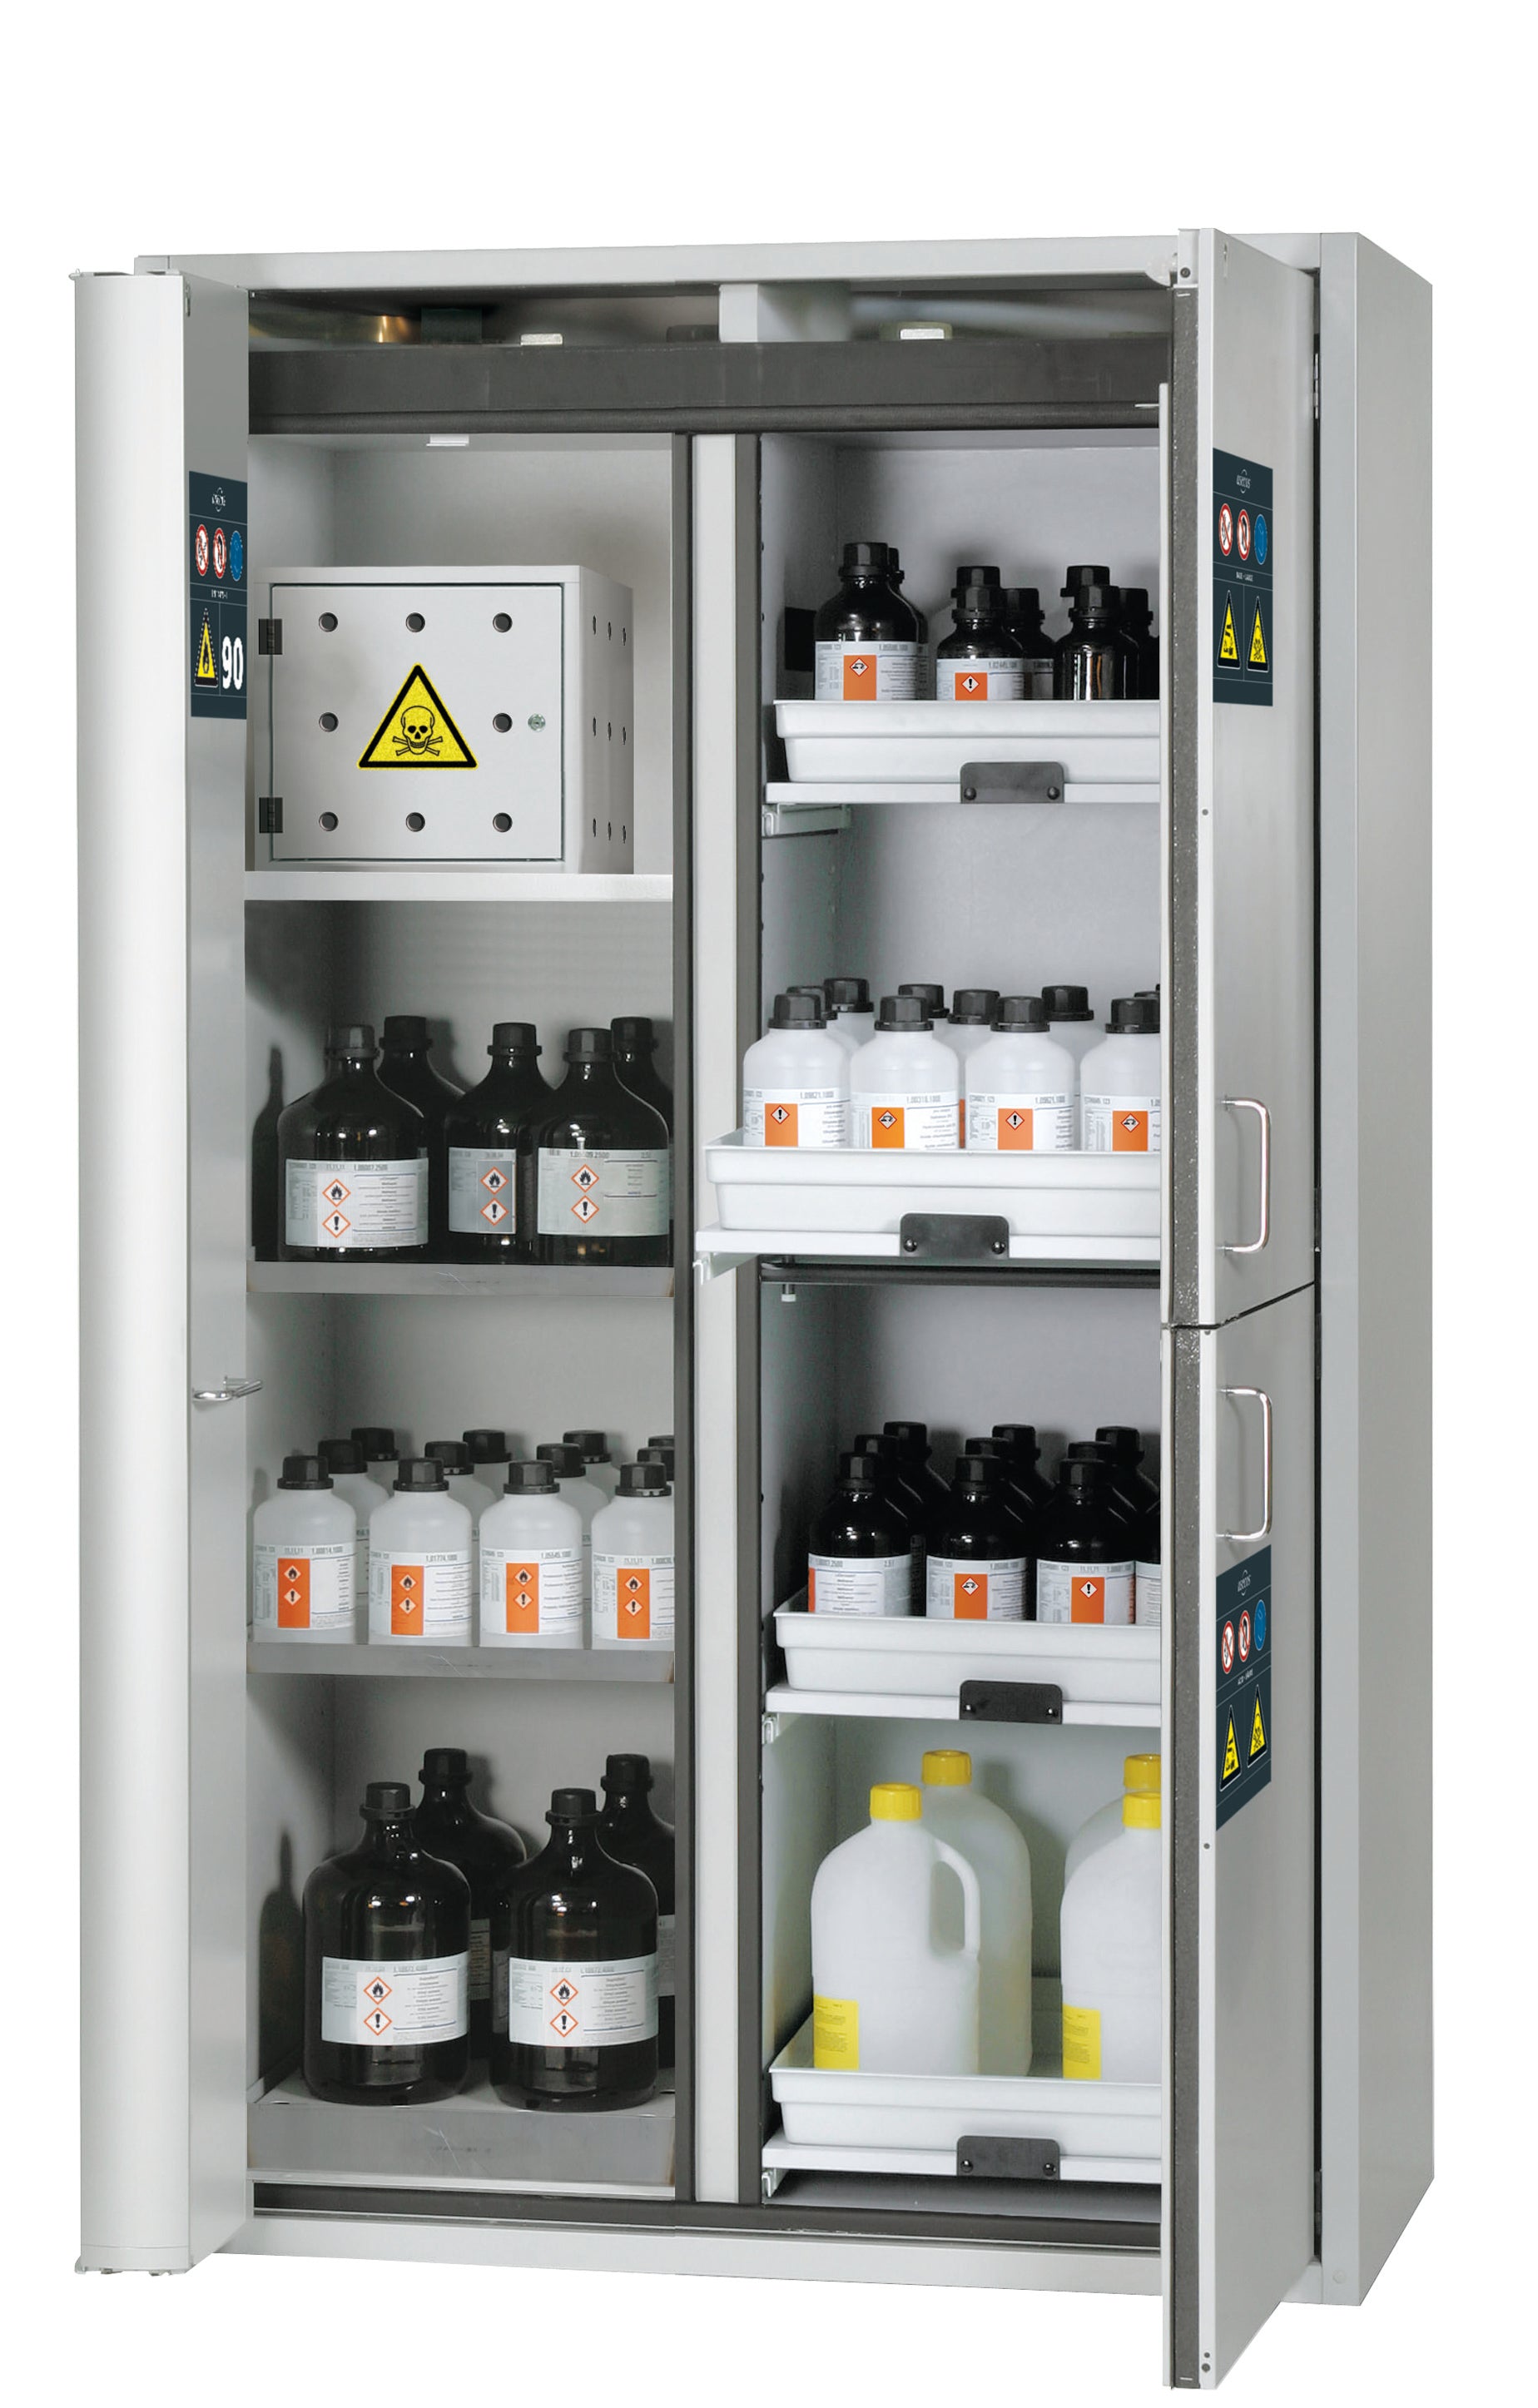 Type 90 combination safety cabinet K-PHOENIX Vol.2-90 model K90.196.120.MC.FWAC in light gray RAL 7035 with 2x standard shelves (stainless steel 1.4301)